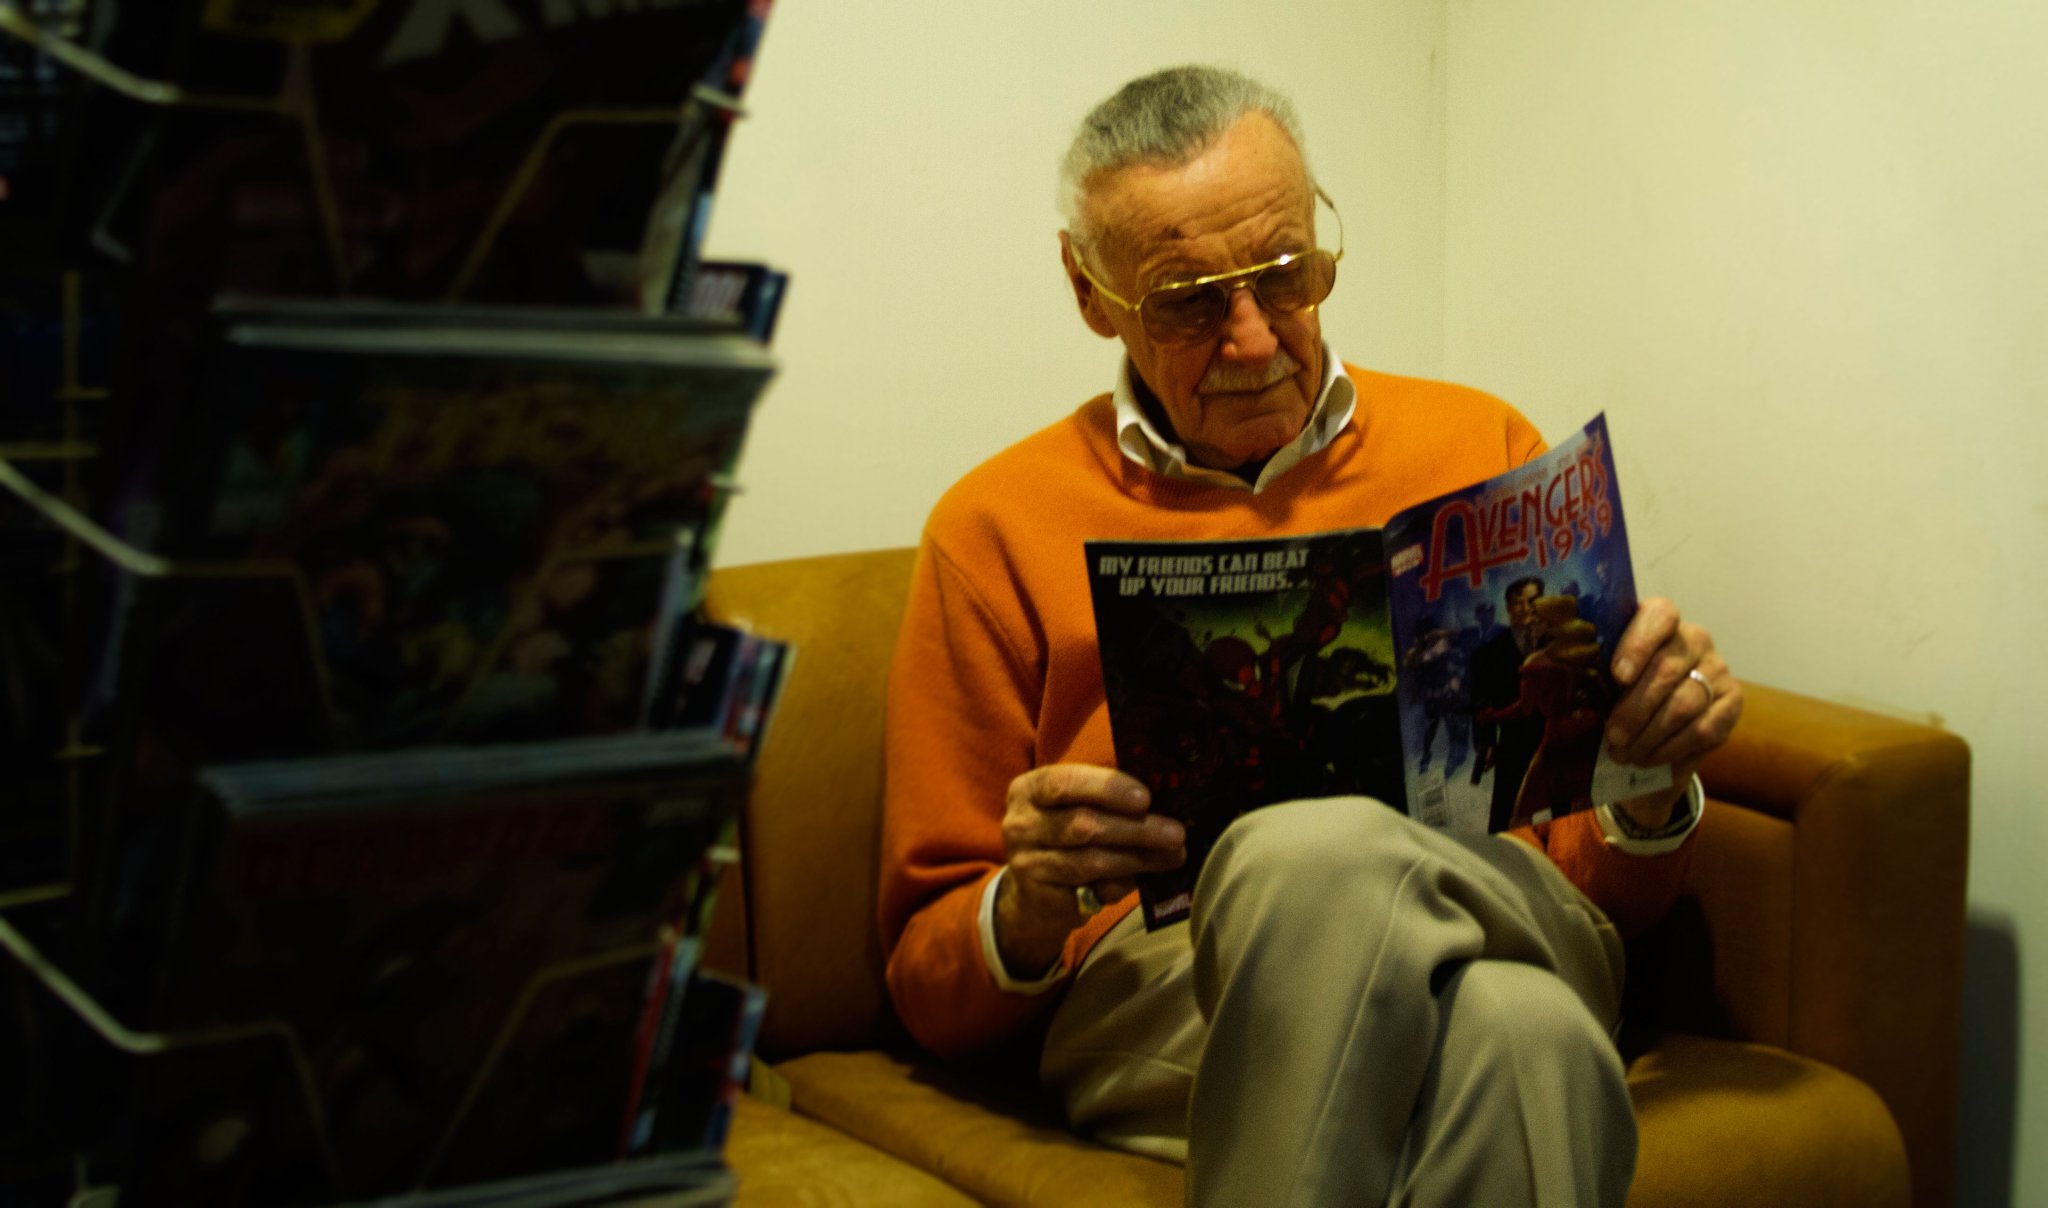 CREATOR OF HEROES. Marvel Legend Stan Lee is remembered for co-creating iconic superheroes like Spider-Man and Iron Man. Photo from Twitter.com/TheRealStanLee 